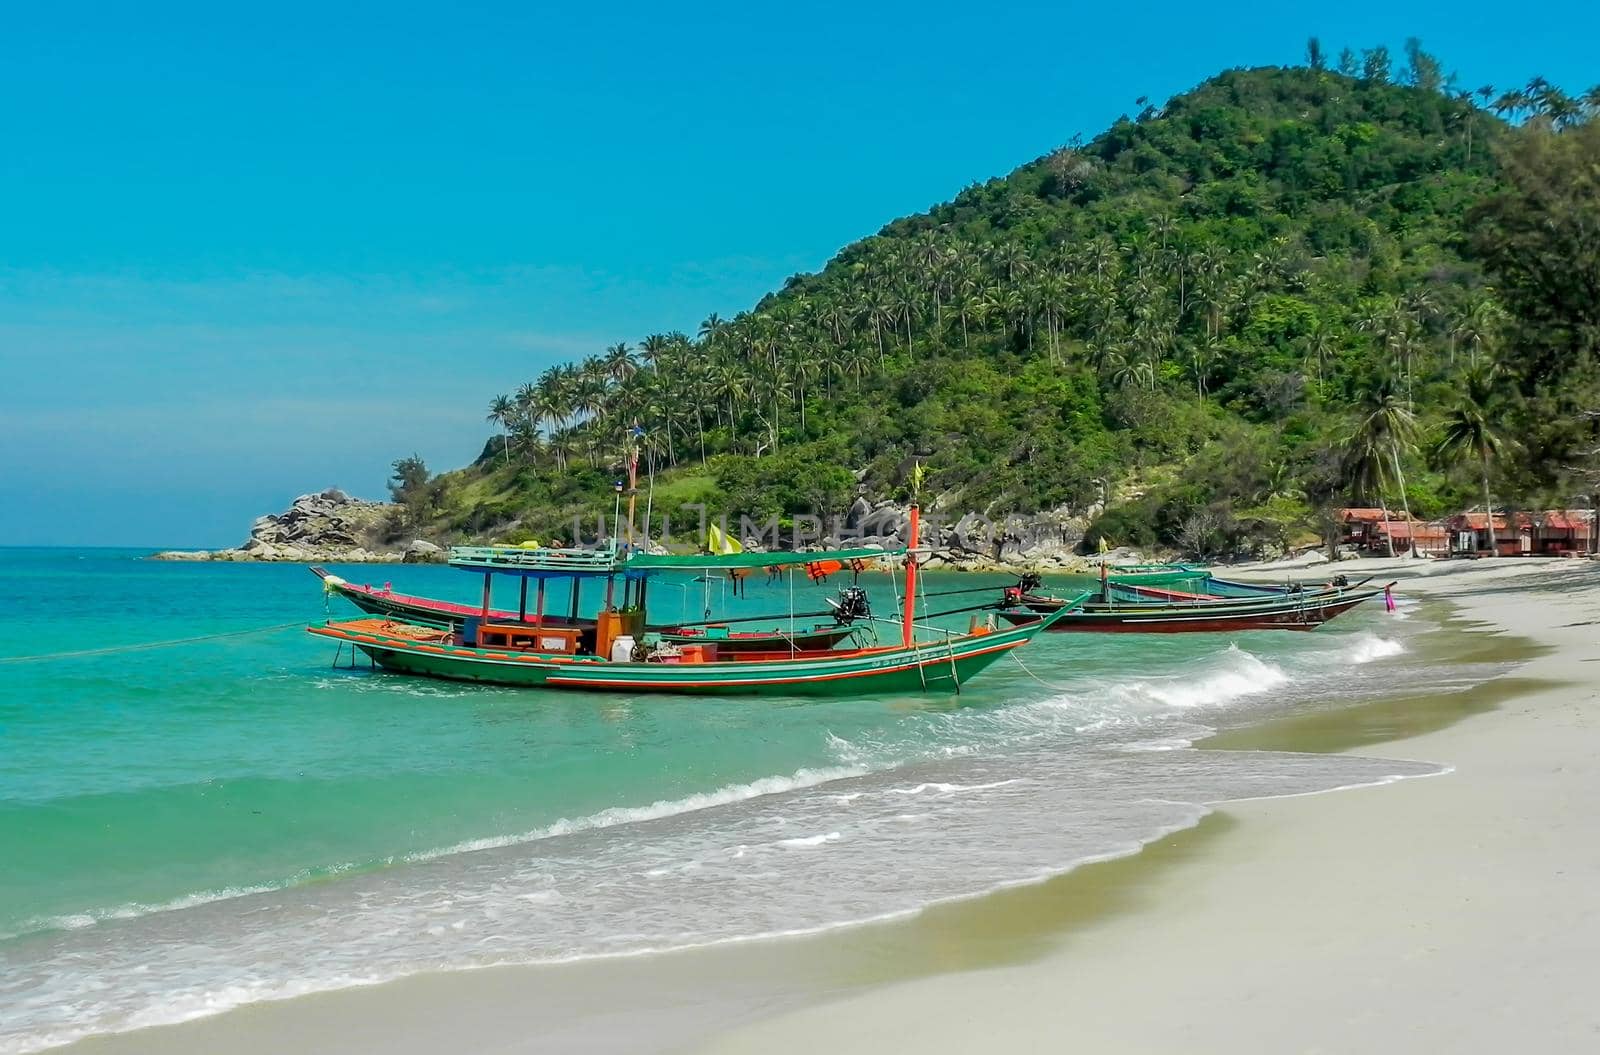 Tropical beach, traditional long tail boats, Gulf of Thailand, Thailand.